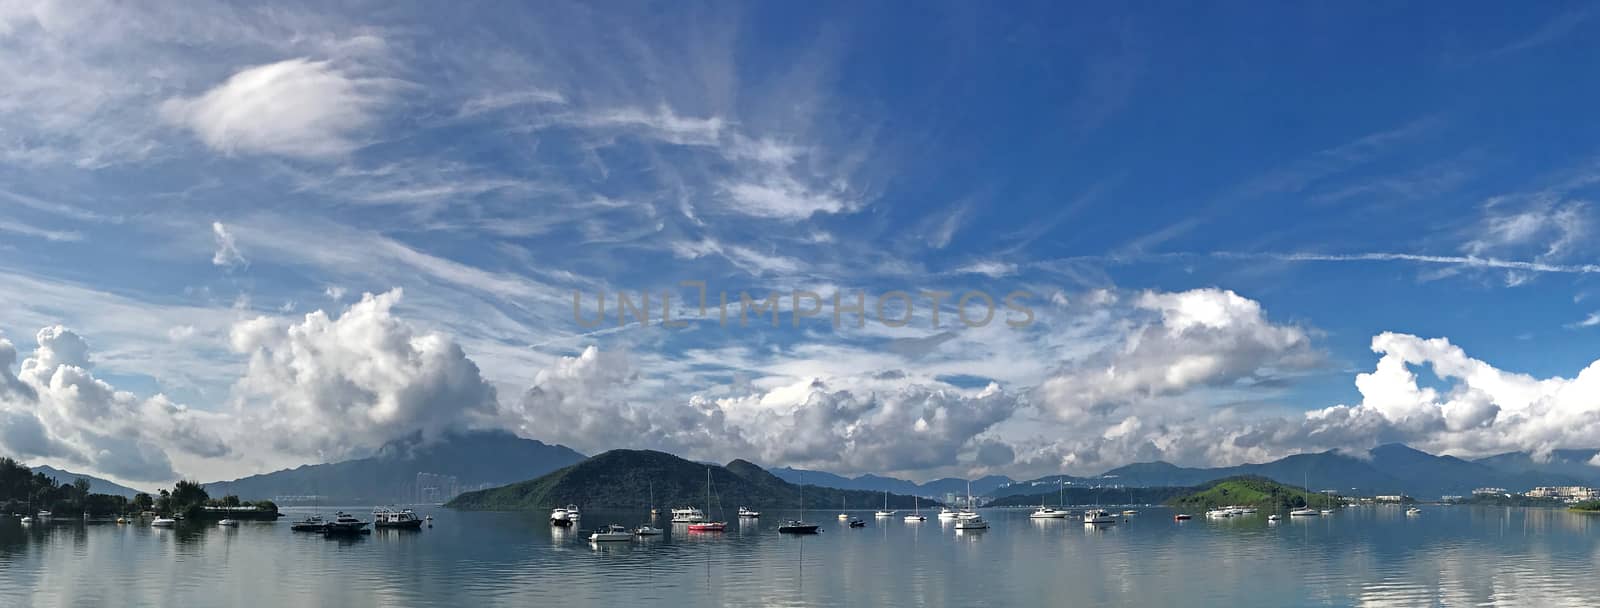 Panorama landscape photography, mountain, cloudscape, boats on l by cougarsan